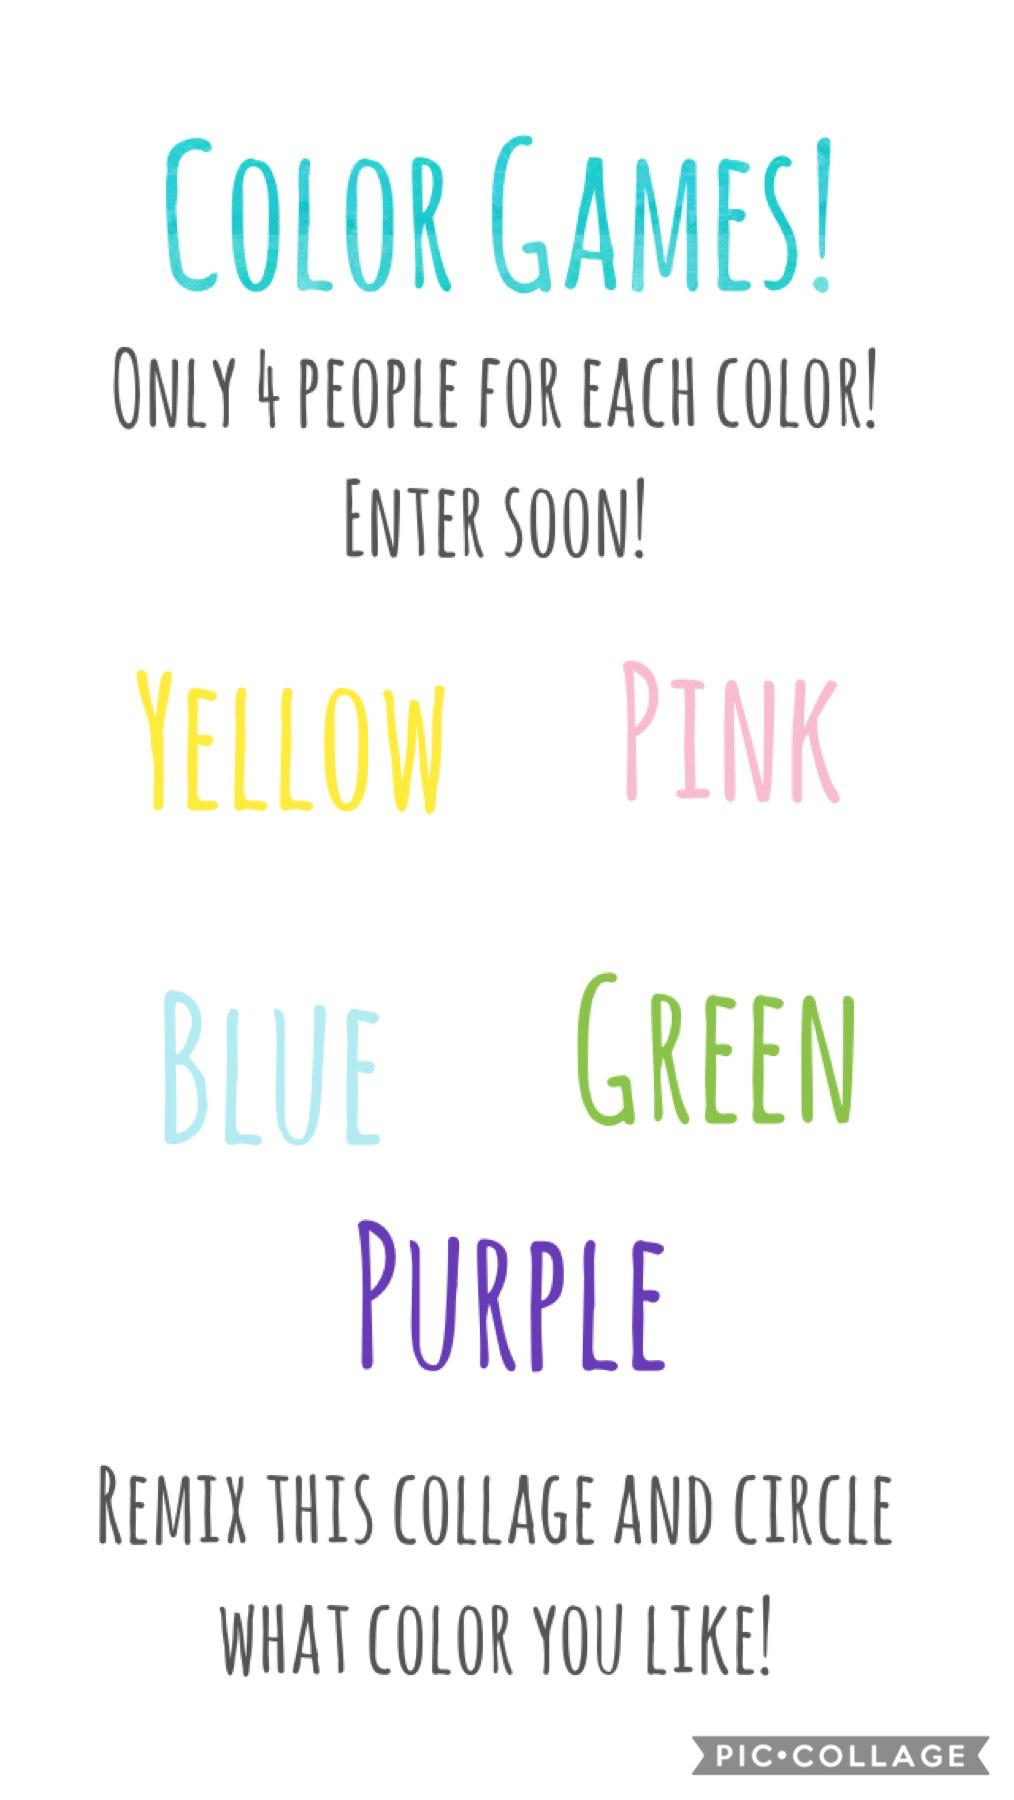 I will give updates telling how many slots are left for each color 